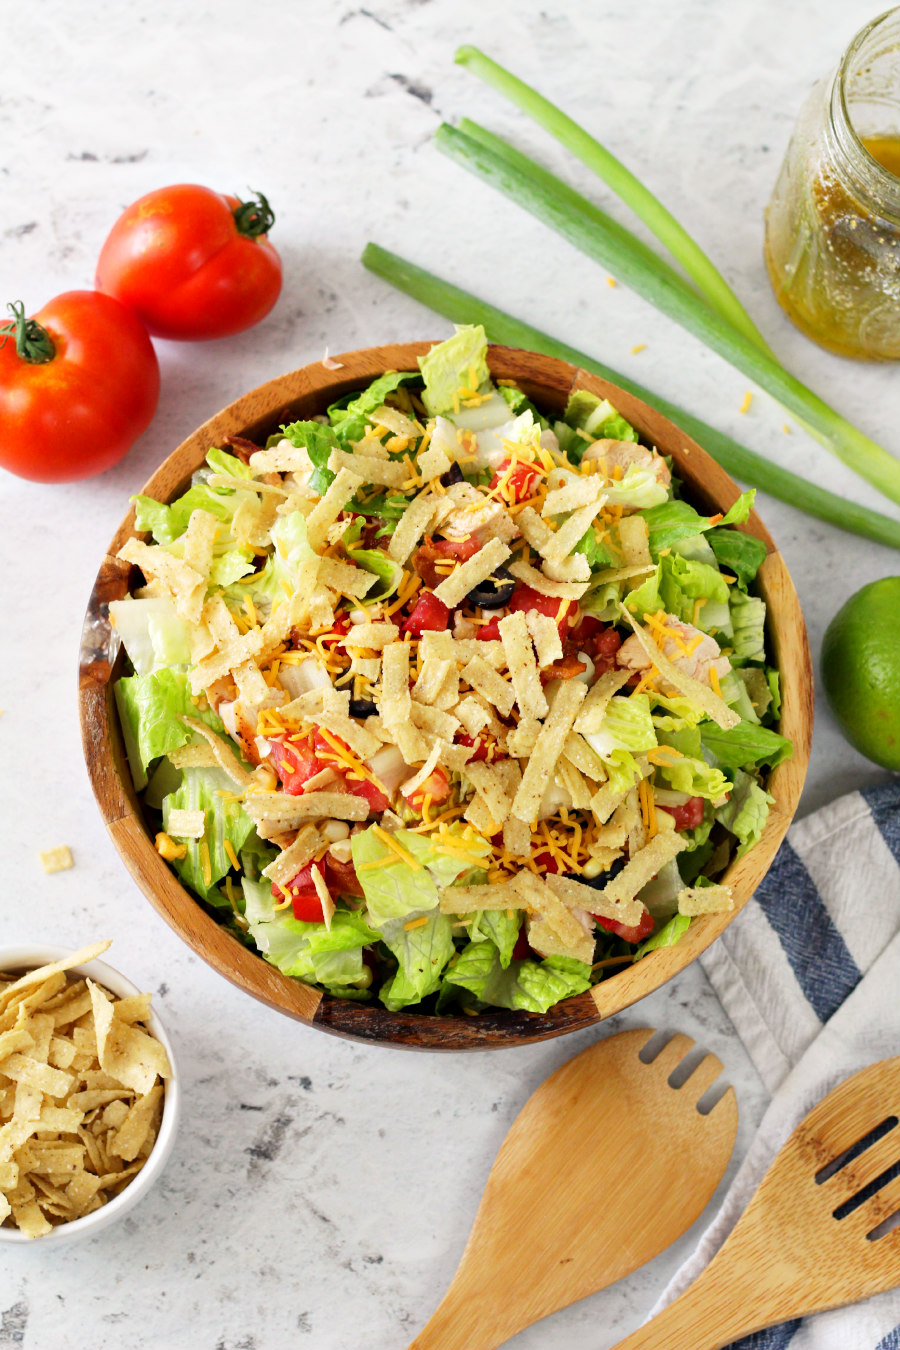 Flat lay photo of Southwestern Chopped Salad in a wooden salad bowl. Tomatoes, scallions, mason jar of dressing, lime, wooden utensils, and tortilla strips sit around the bowl.